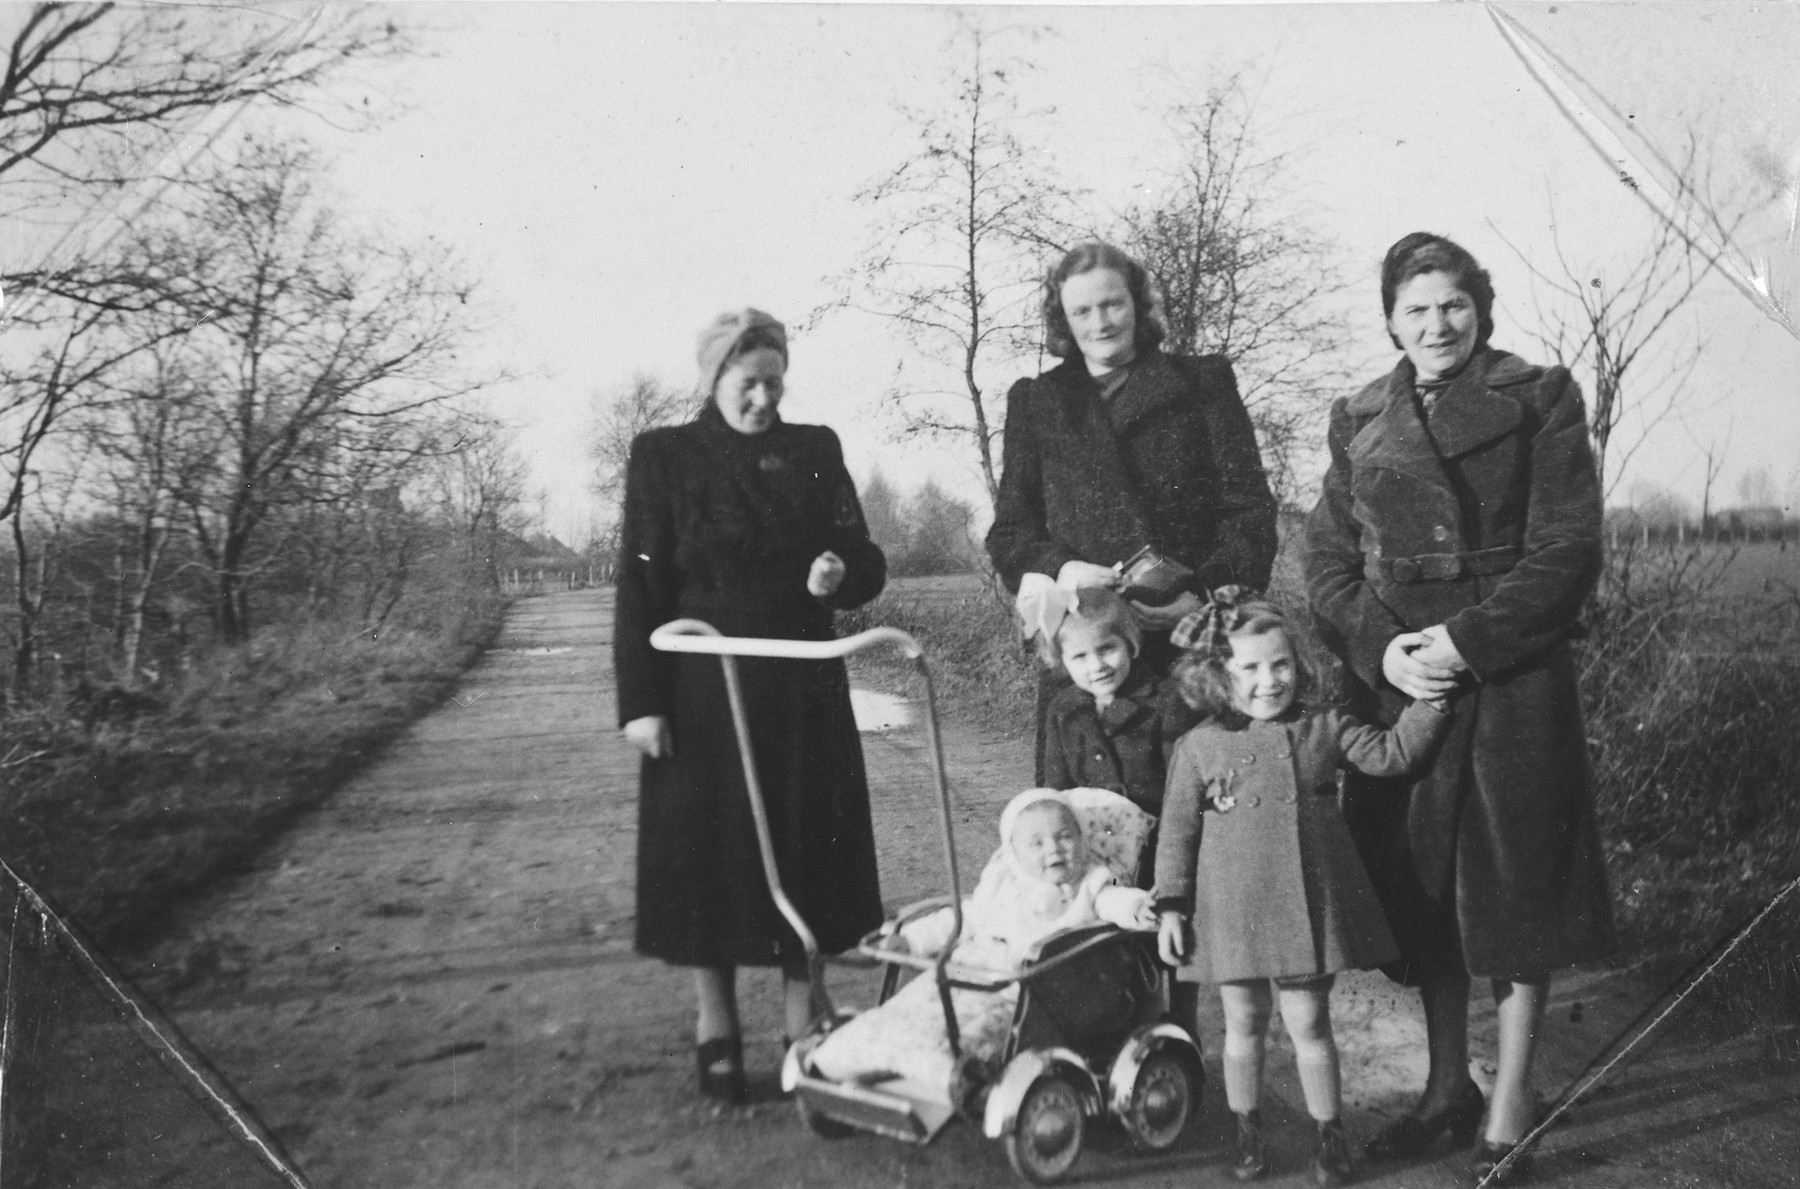 Three women pose with their young children.  The woman and child on the far right are Jews in hiding.

Pictured on the right are Benjamina and Rita Serphos.